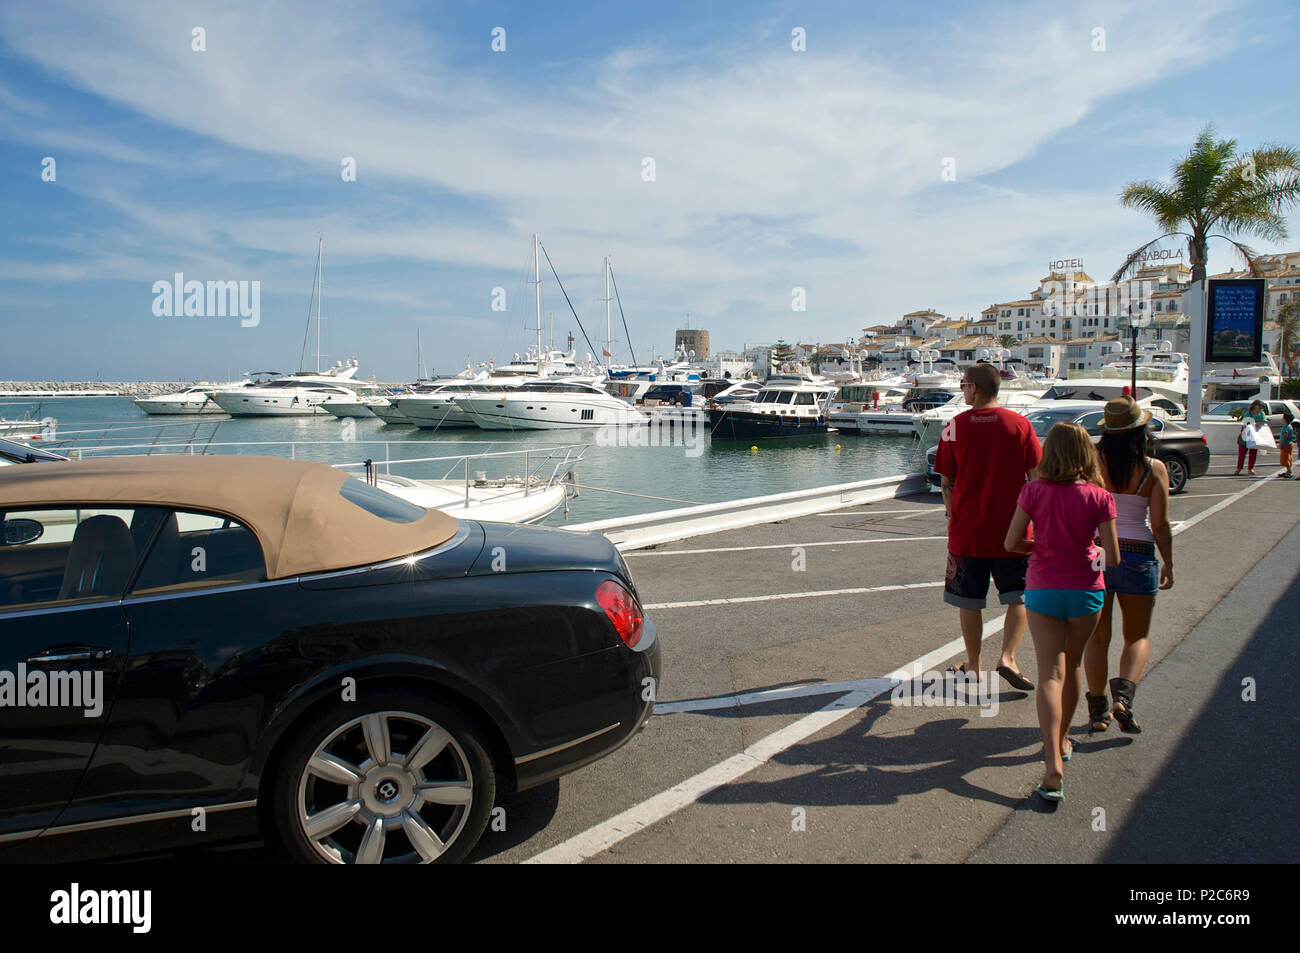 Luxury car and yachts in the Yacht harbour of Marbella, Puerto Banus, Malaga probince, Andalusia, Spain Stock Photo